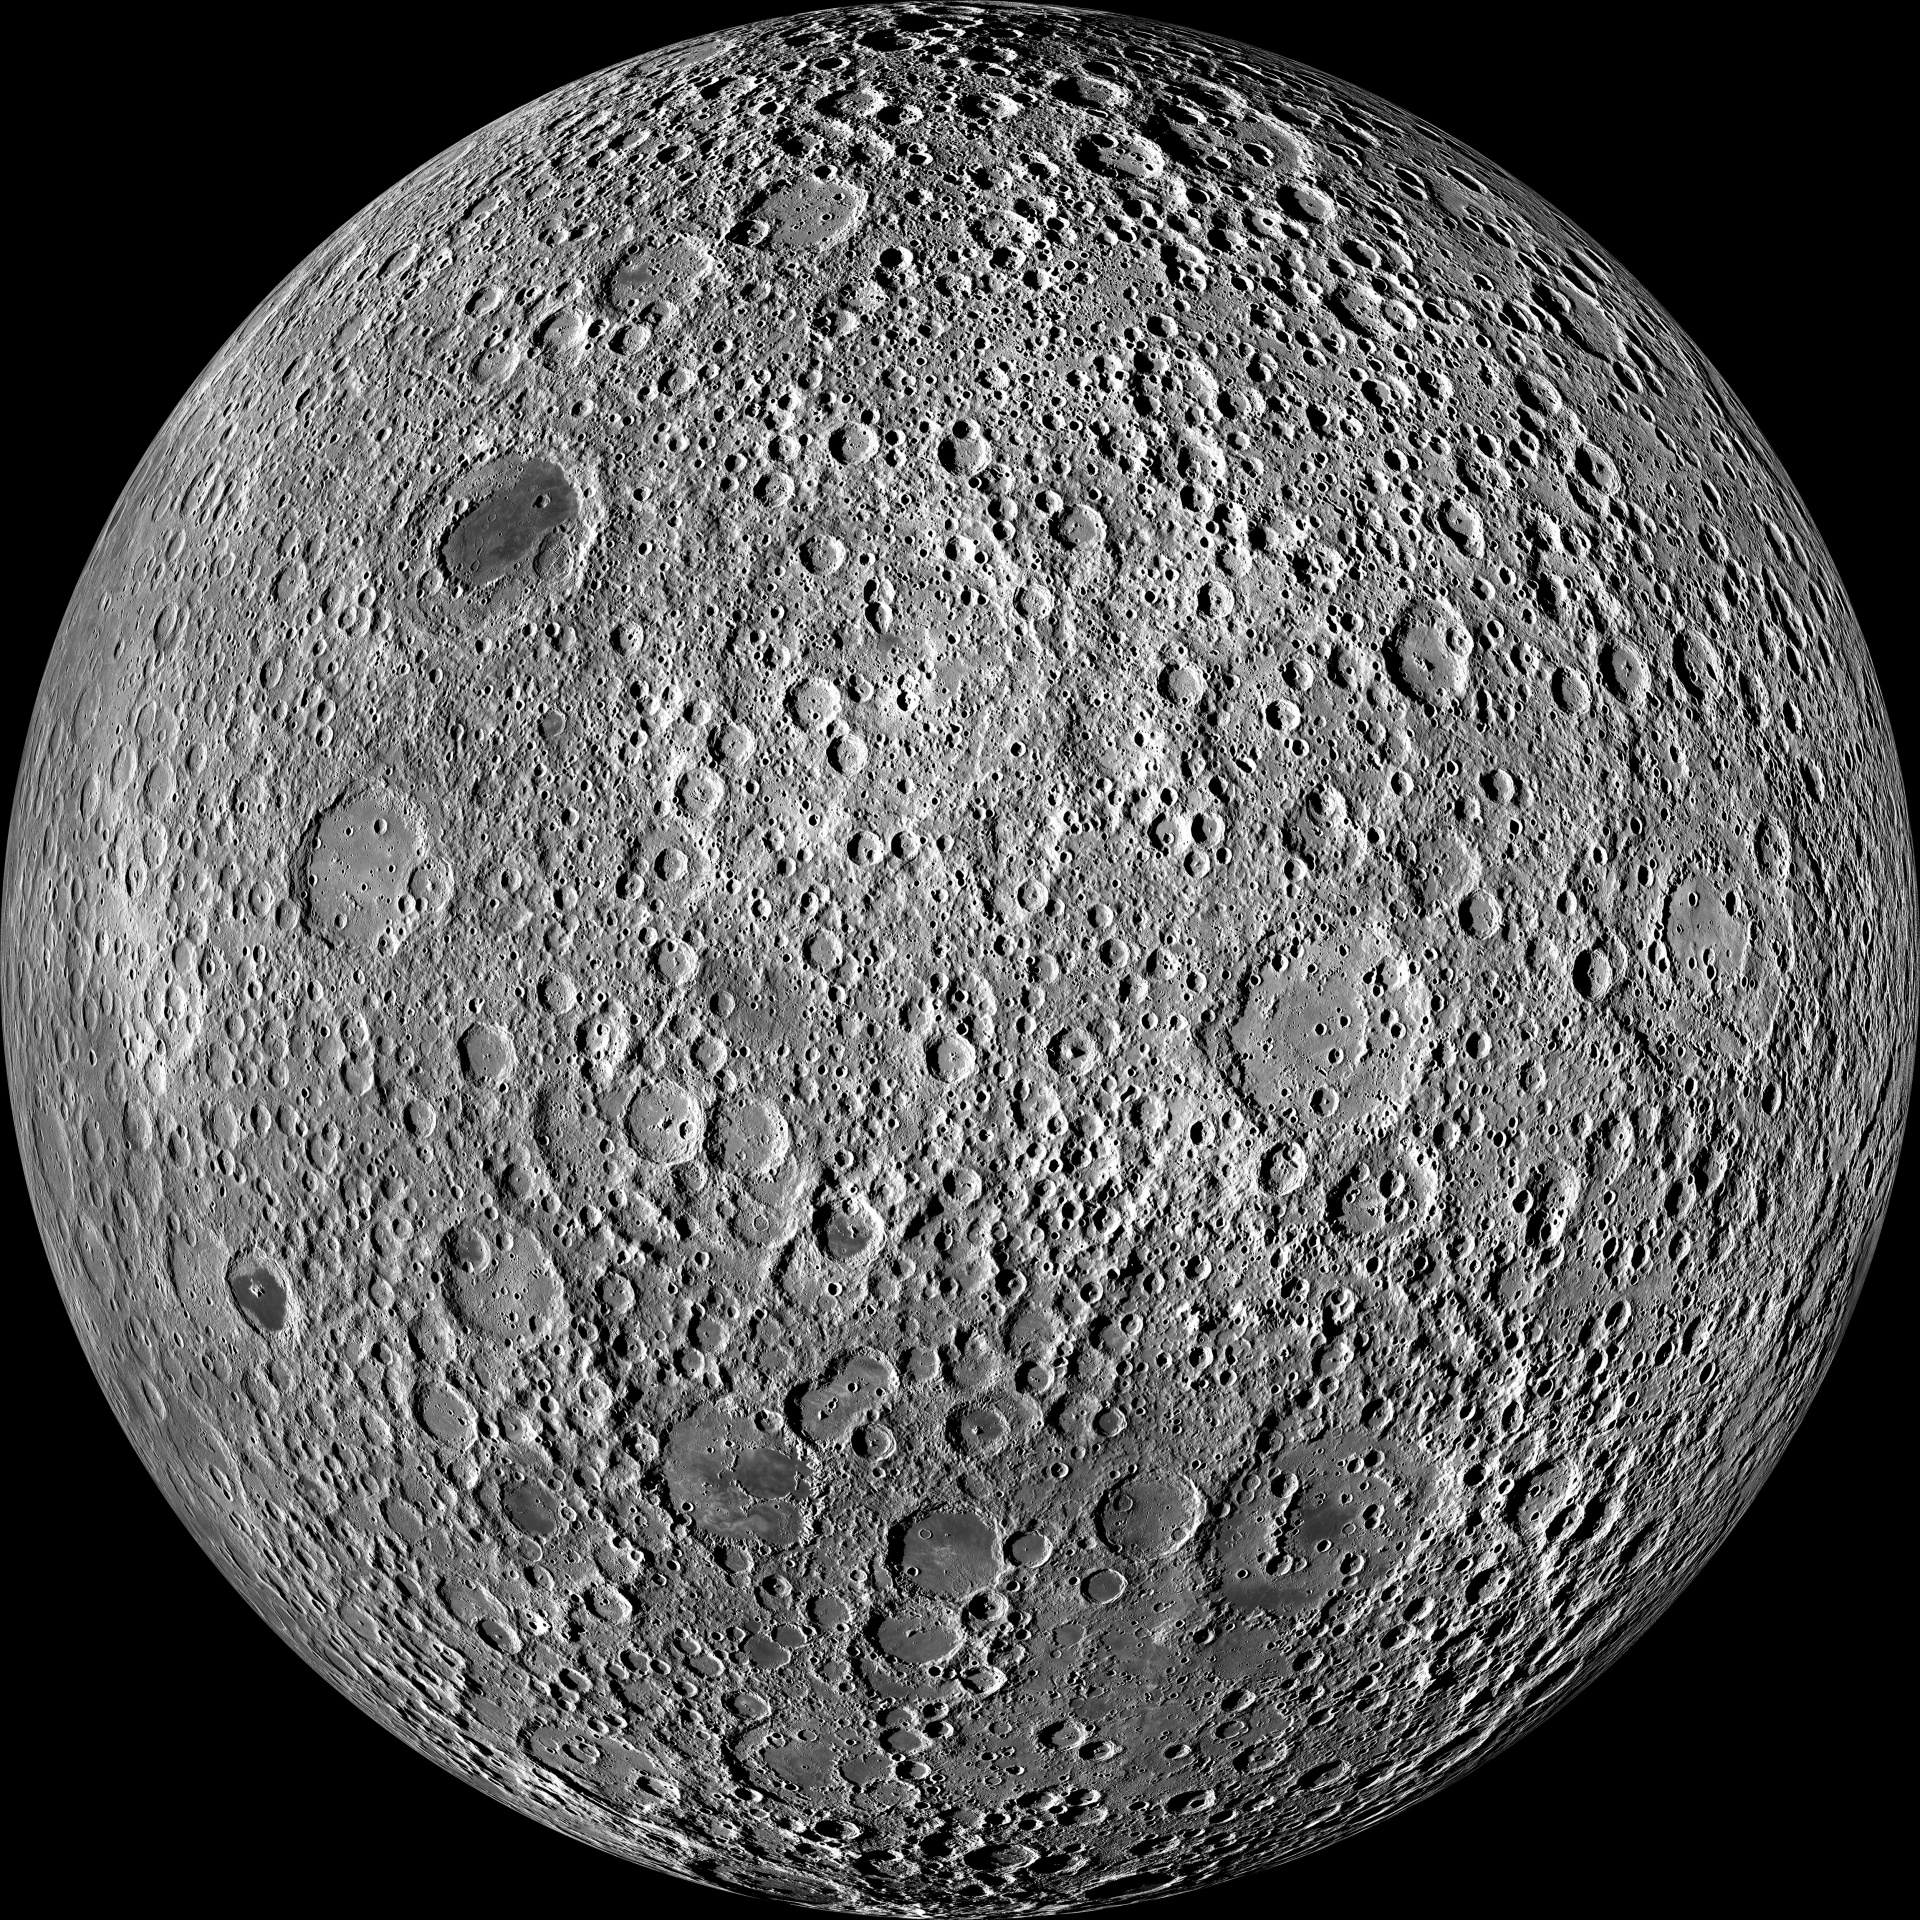 Lunar Reconnaissance Orbiter image of the far side of the moon